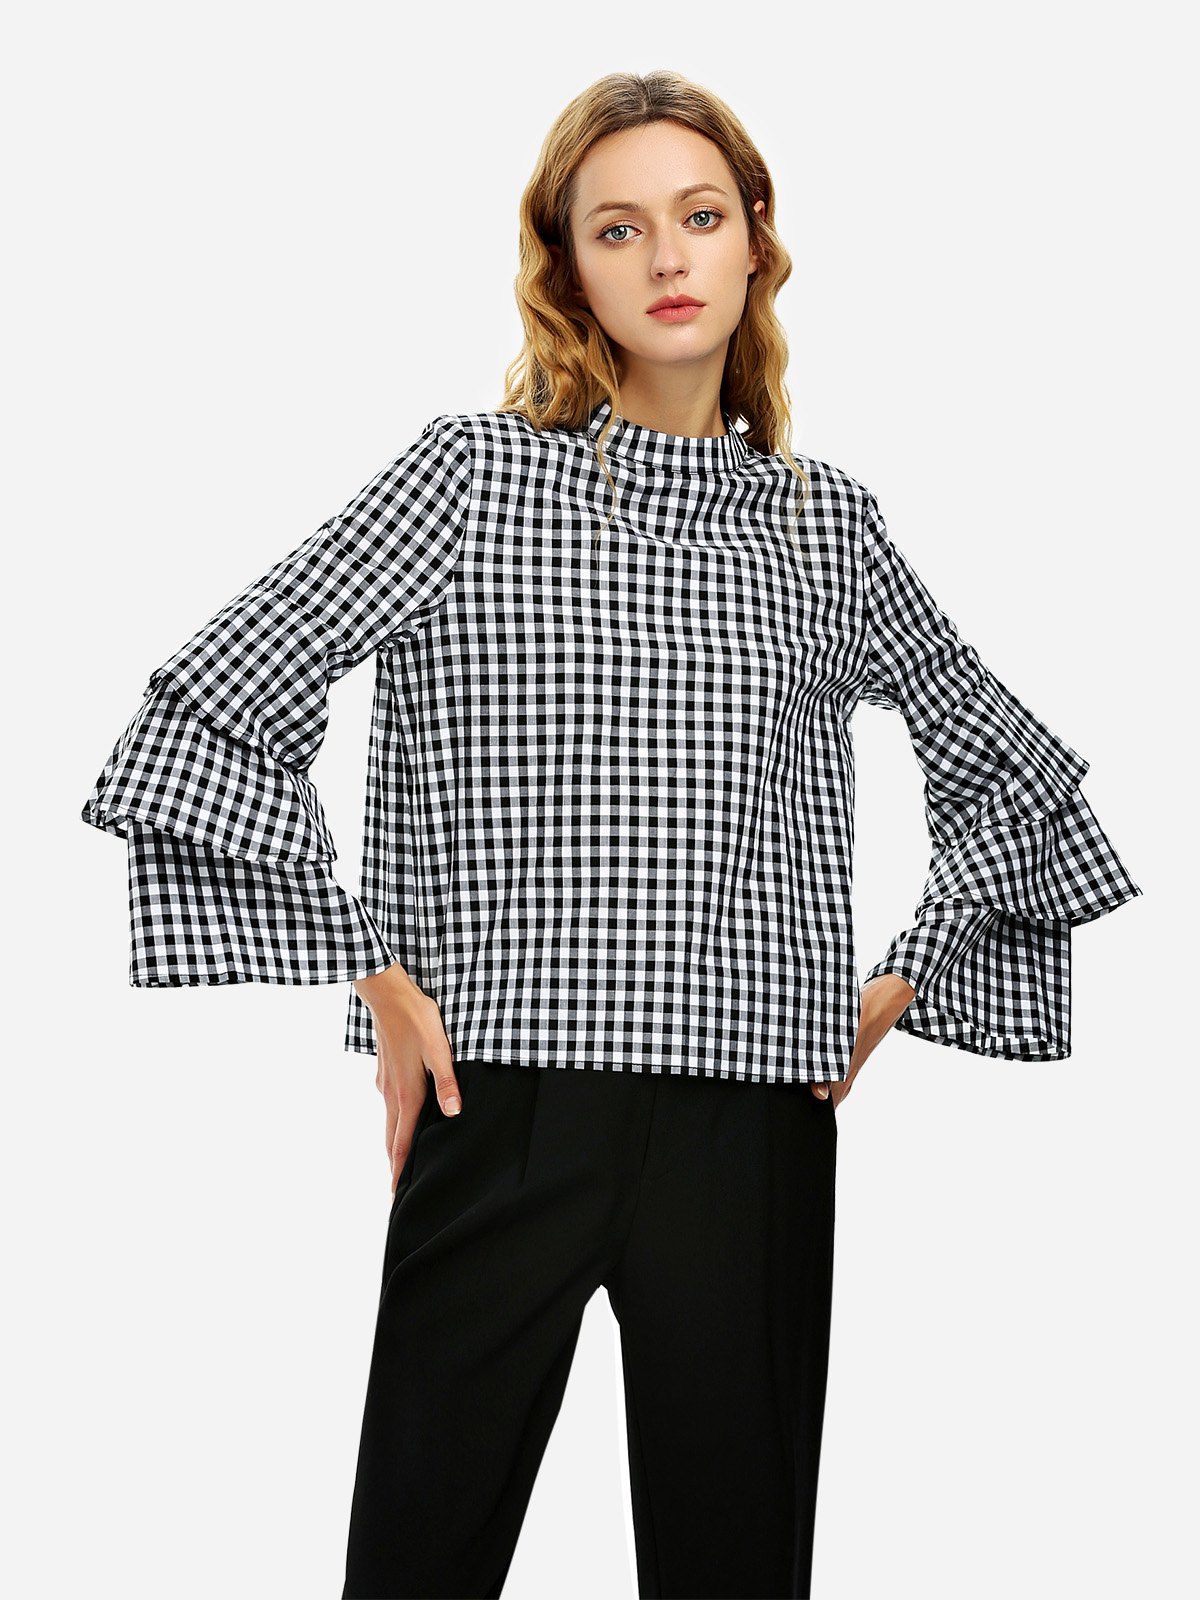 

ZAN.STYLE Bell Sleeve Plaid Blouse Shirt, Black and white